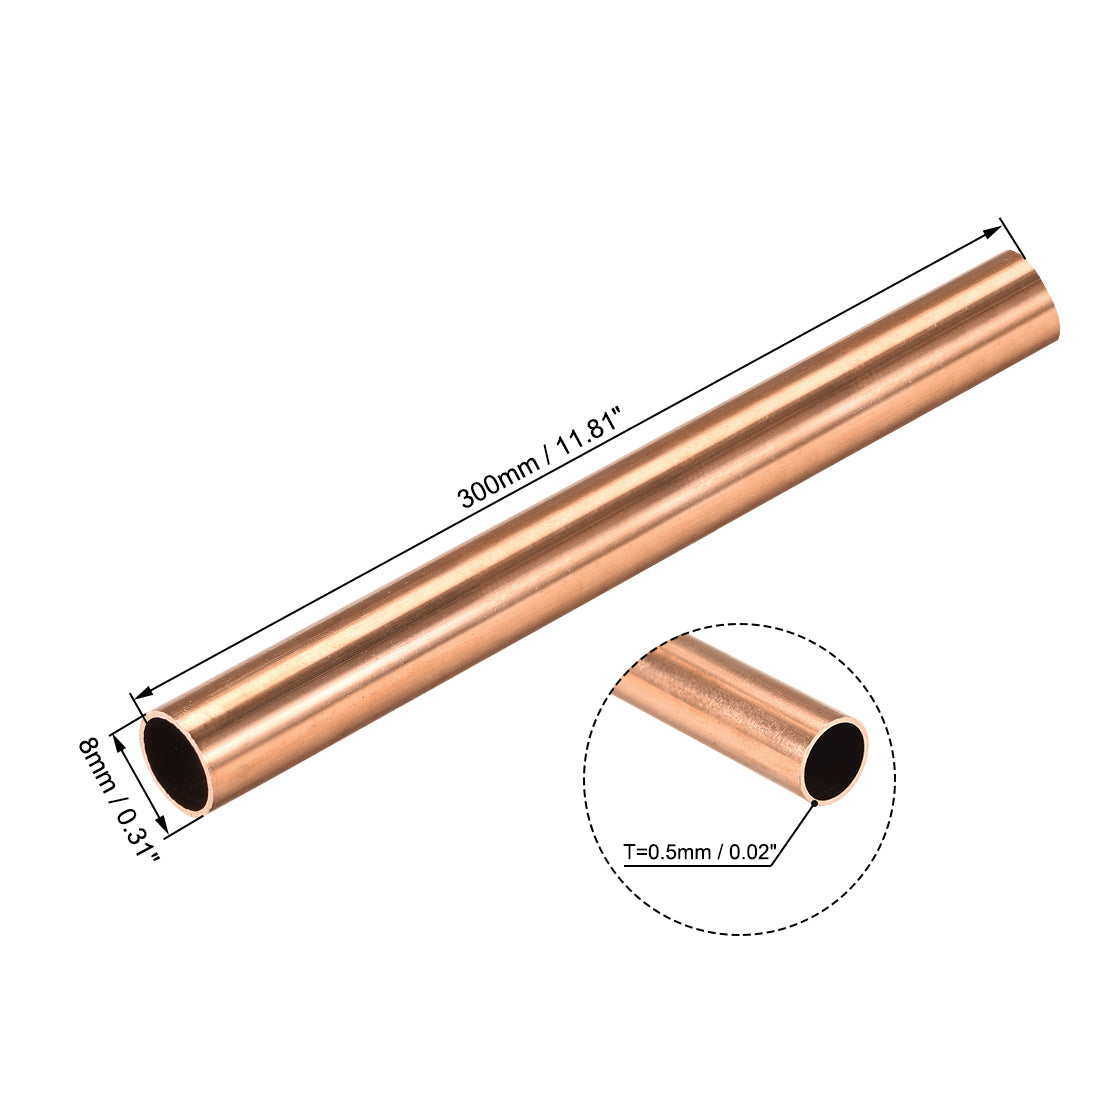 uxcell Uxcell Copper Round Tube 8mm OD 0.5mm Wall Thickness 300mm Long Hollow Straight Pipe Tubing 2 Pcs